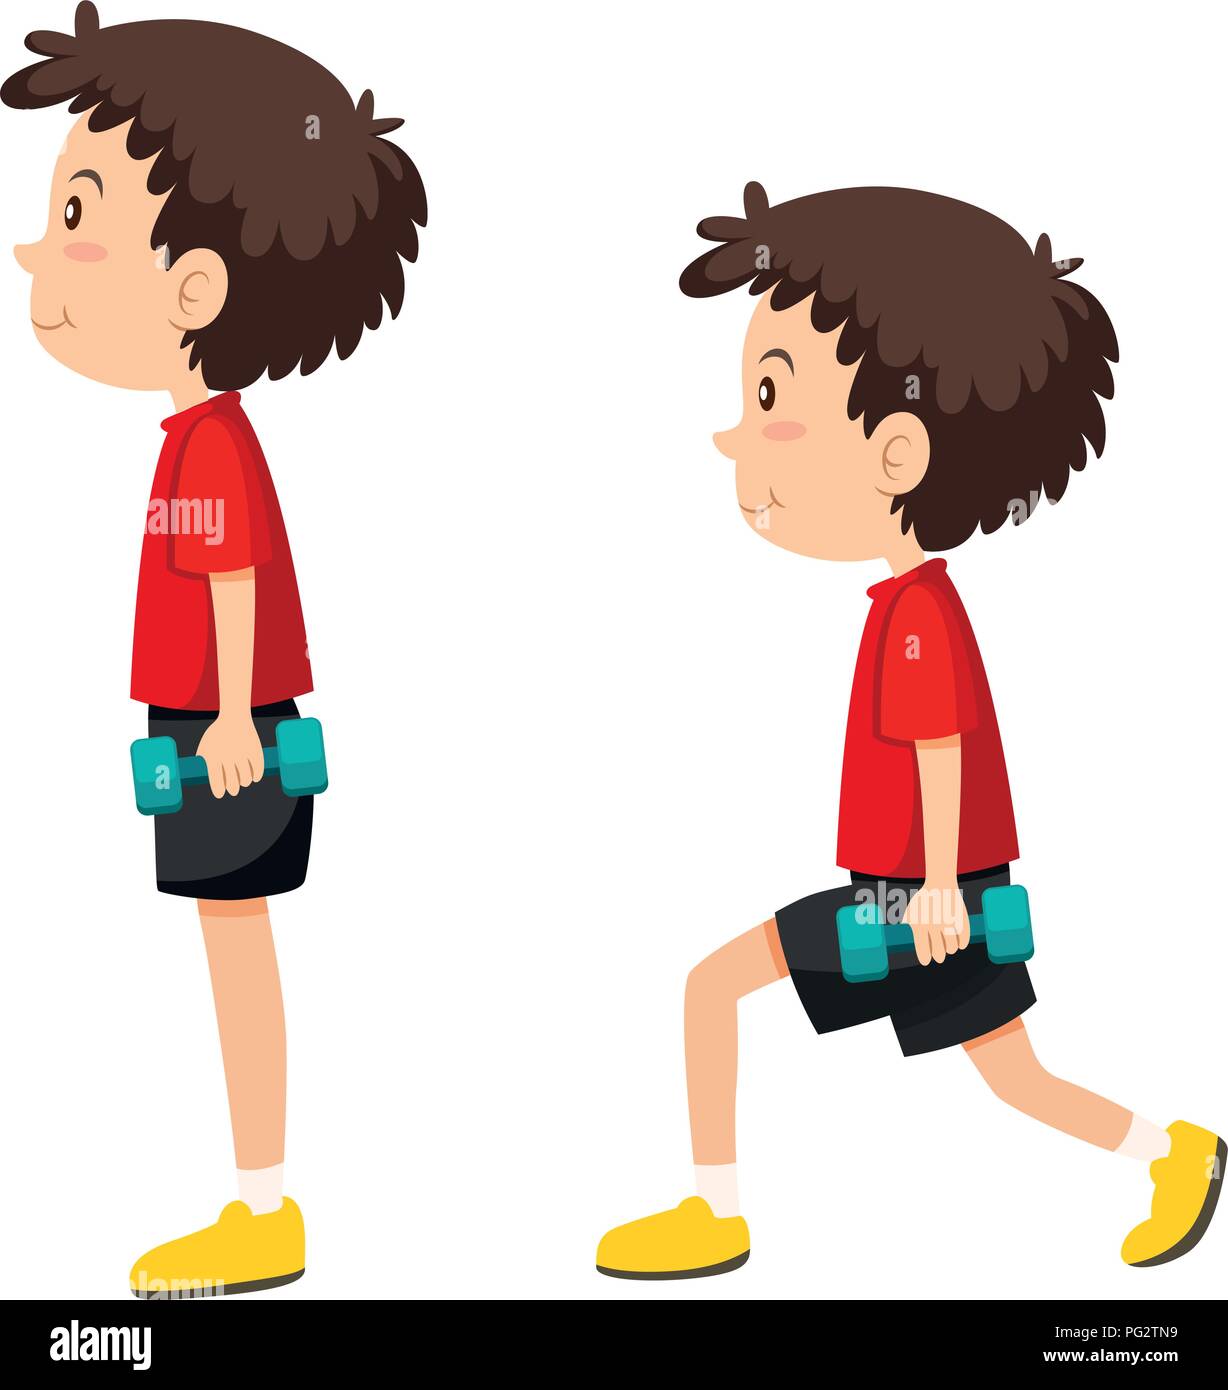 Boy doing lungeing exercise illustration Stock Vector